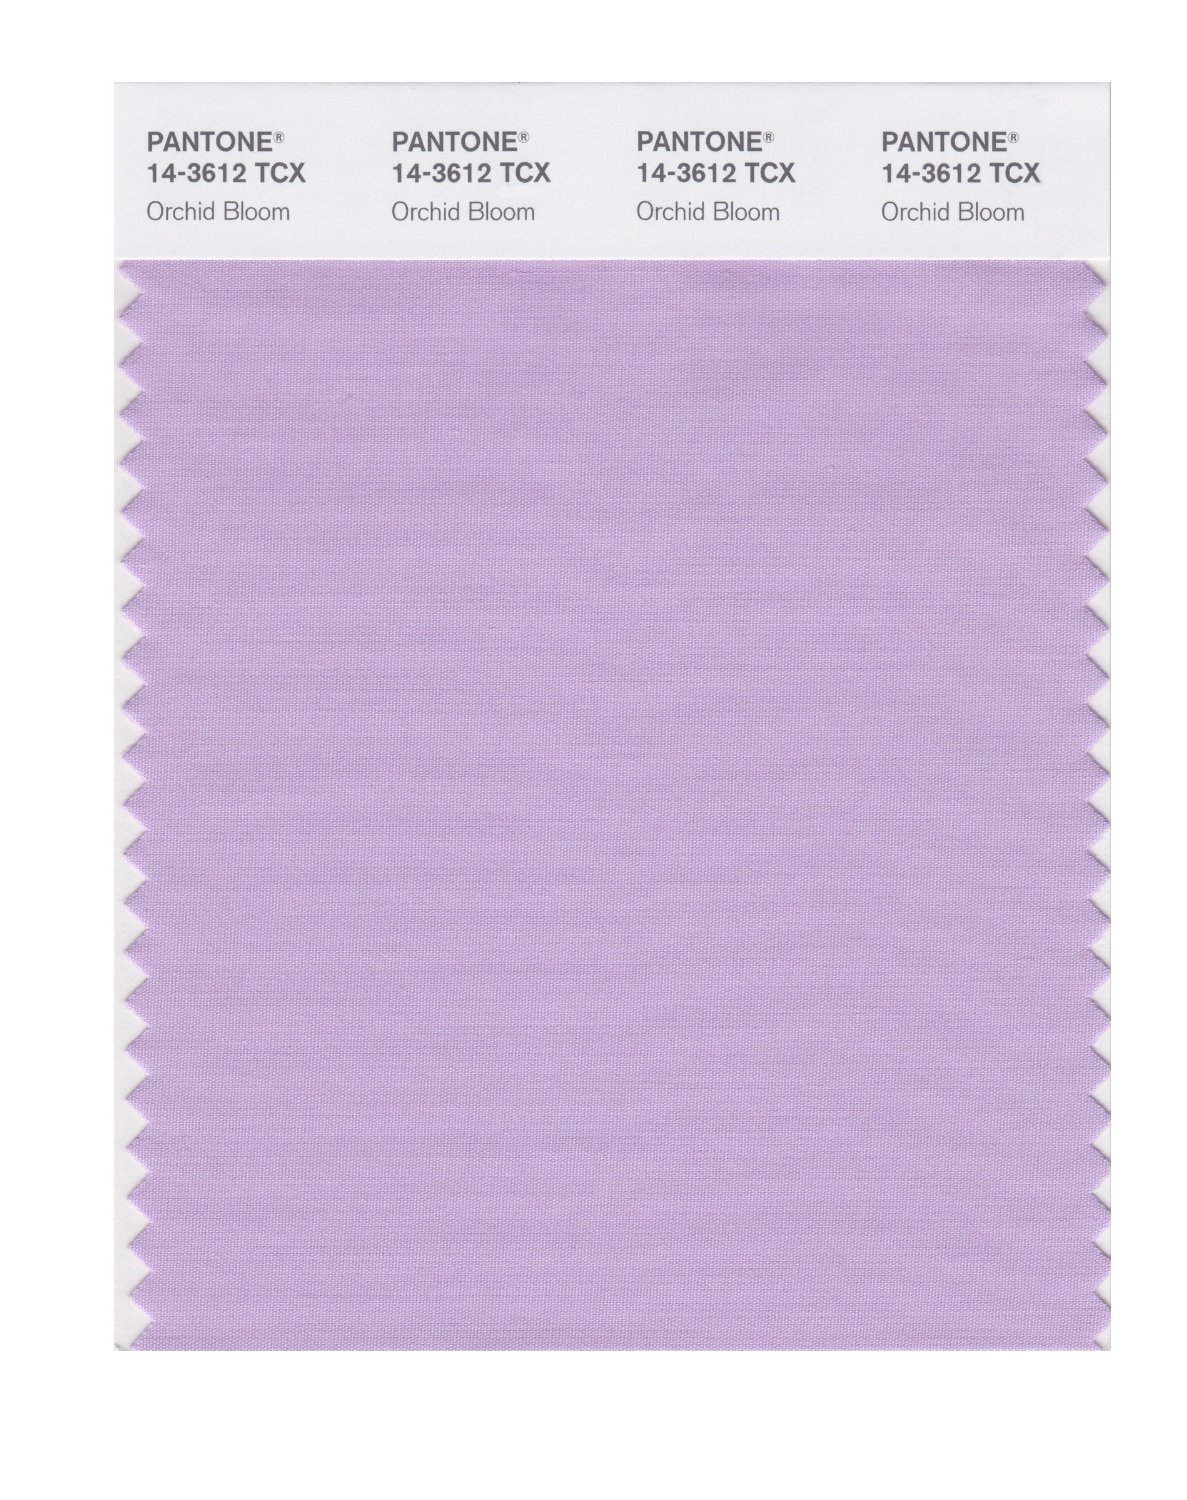 Pantone Cotton Swatch 14-3612 Orchid Bloom